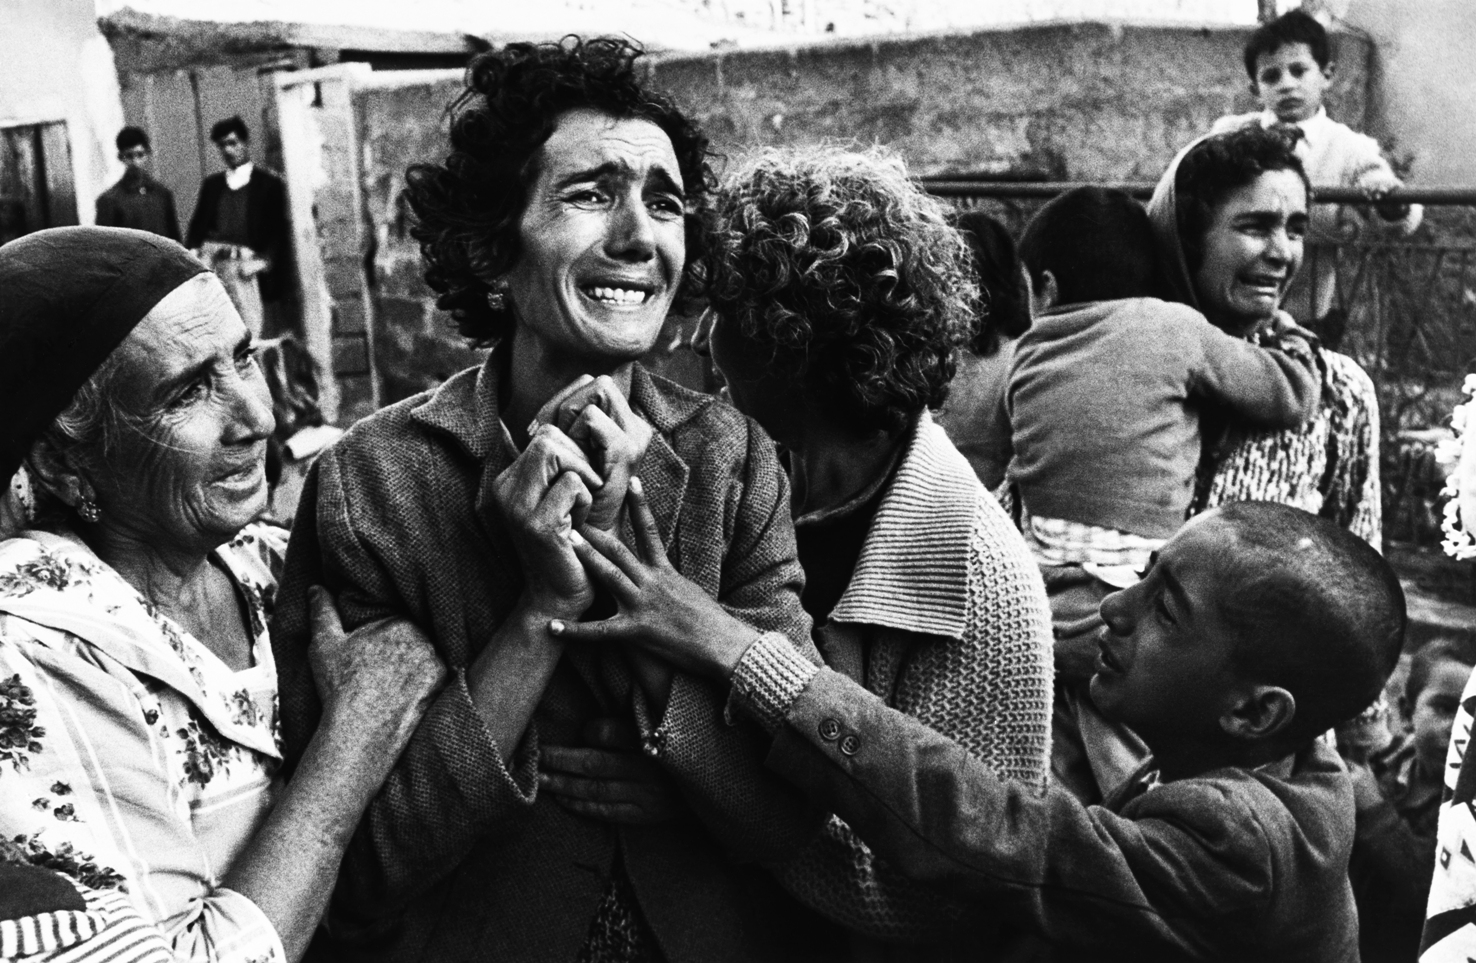 Shaped by War: Photographs by Don McCullin, Don McCullin